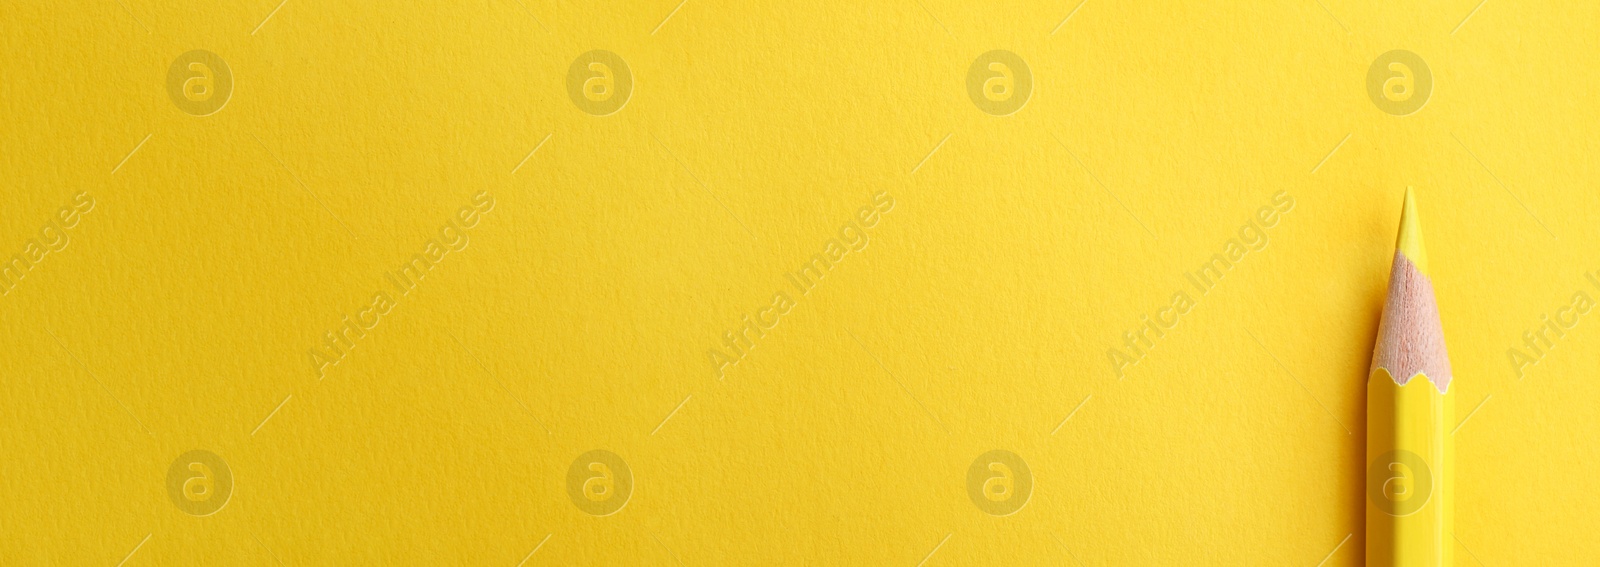 Image of Color pencil on yellow background, top view with space for text. Banner design